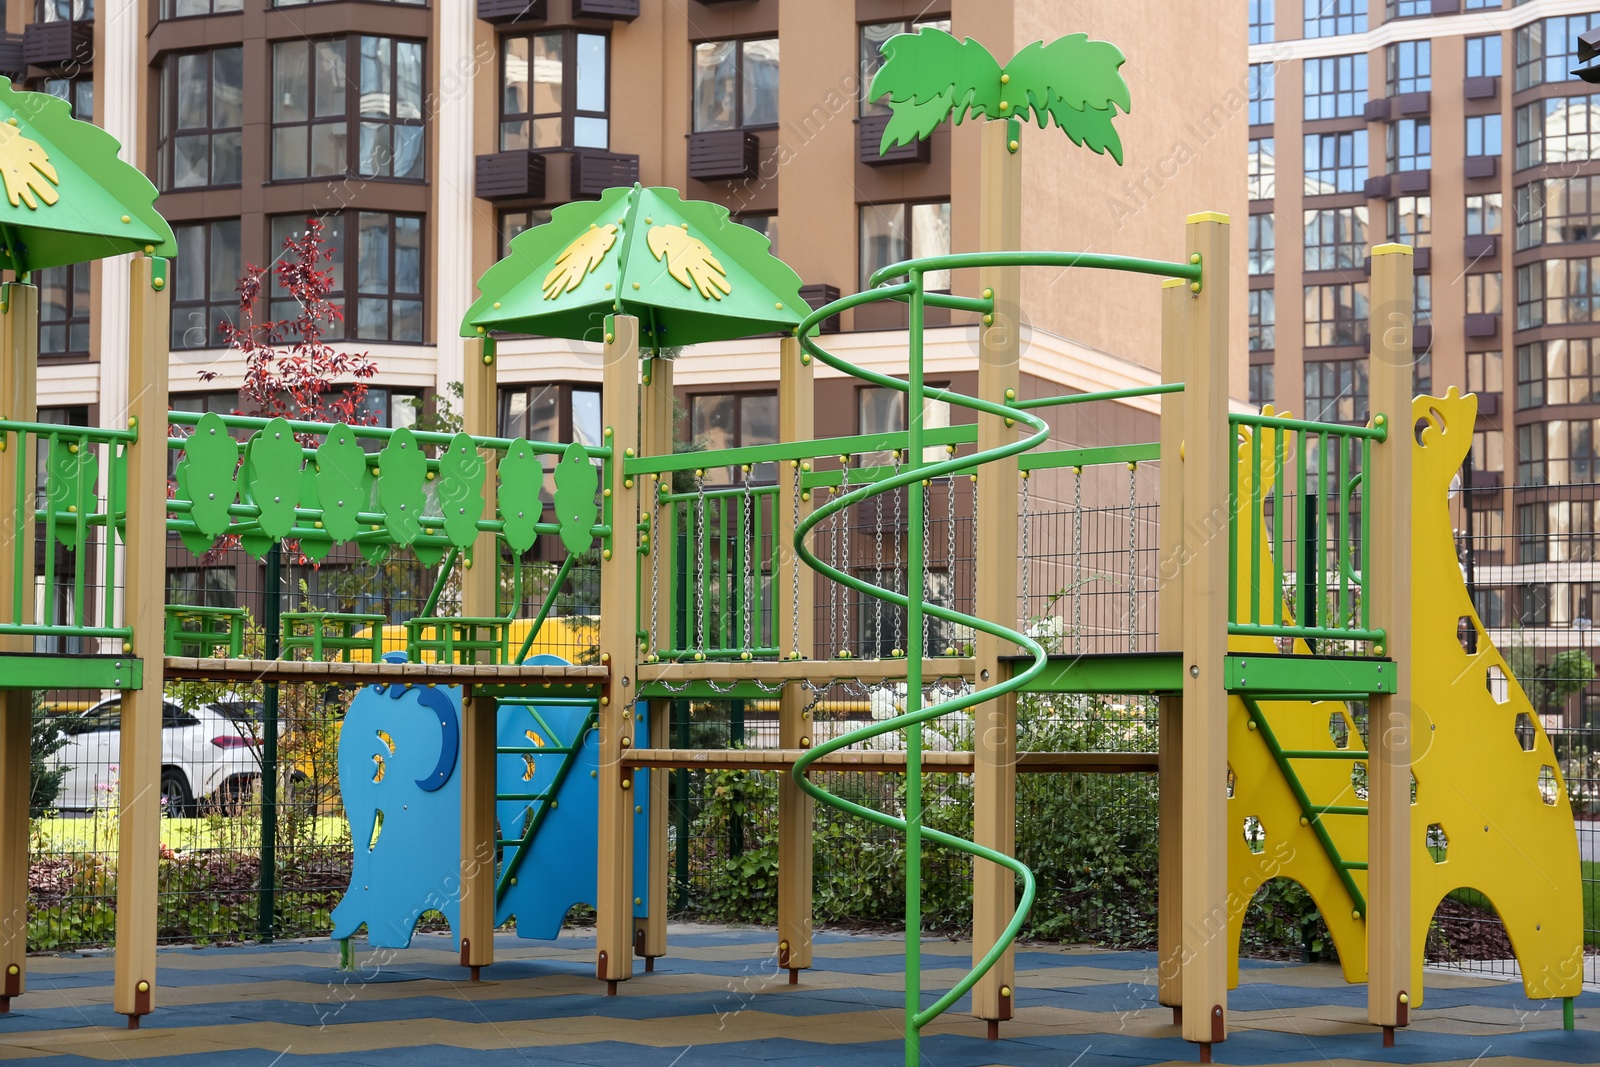 Photo of Colourful outdoor playground for children in residential area